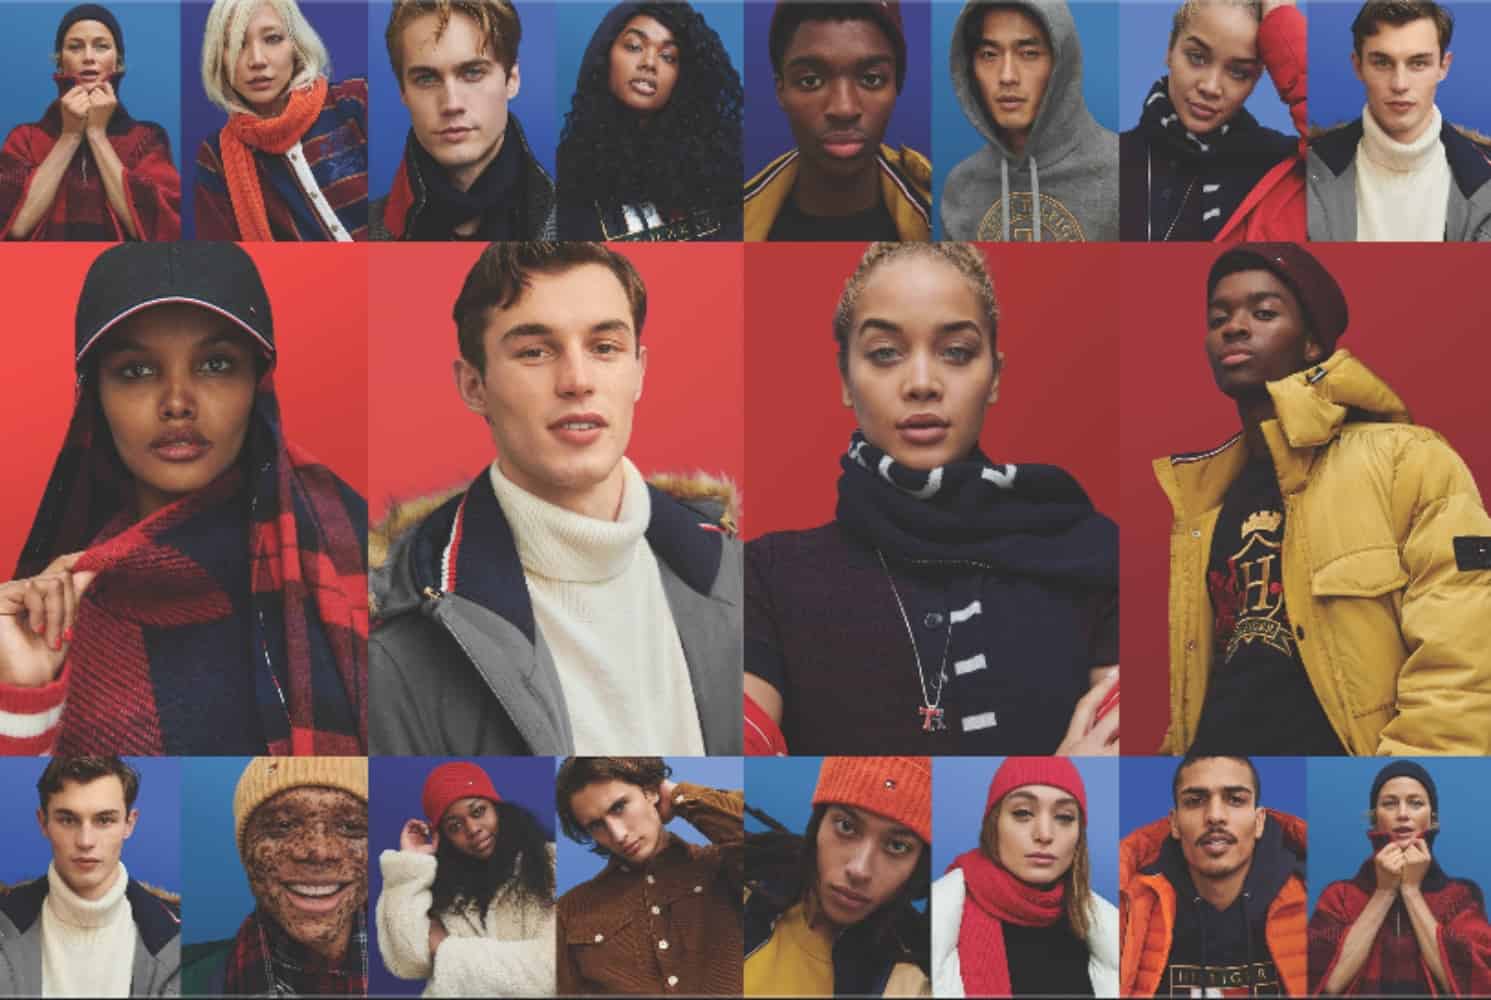 Tommy Hilfiger's Fall 2020 Campaign is More Than Just an Ad